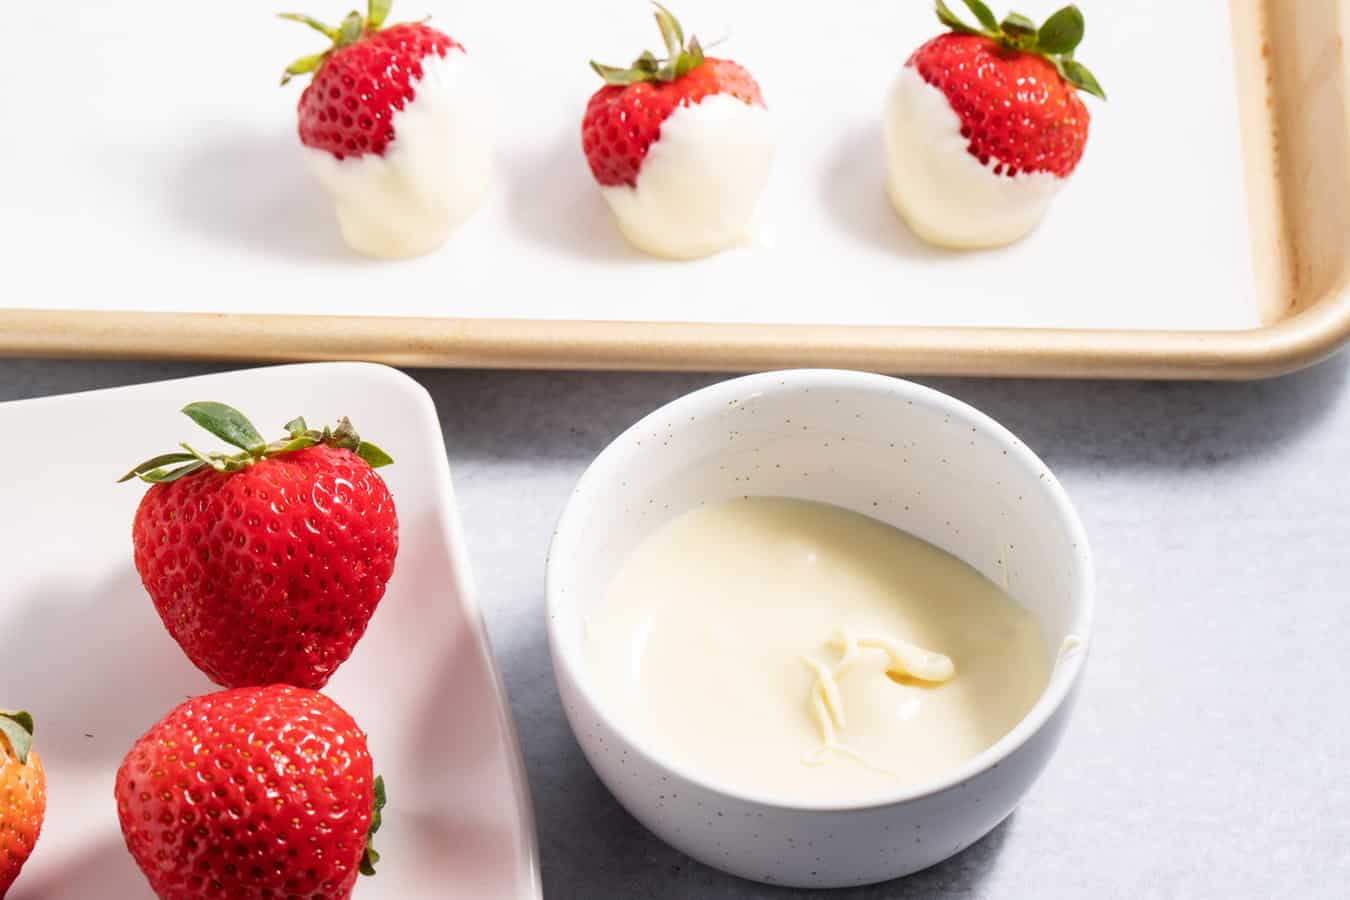 White chocolate dipping station for strawberries.